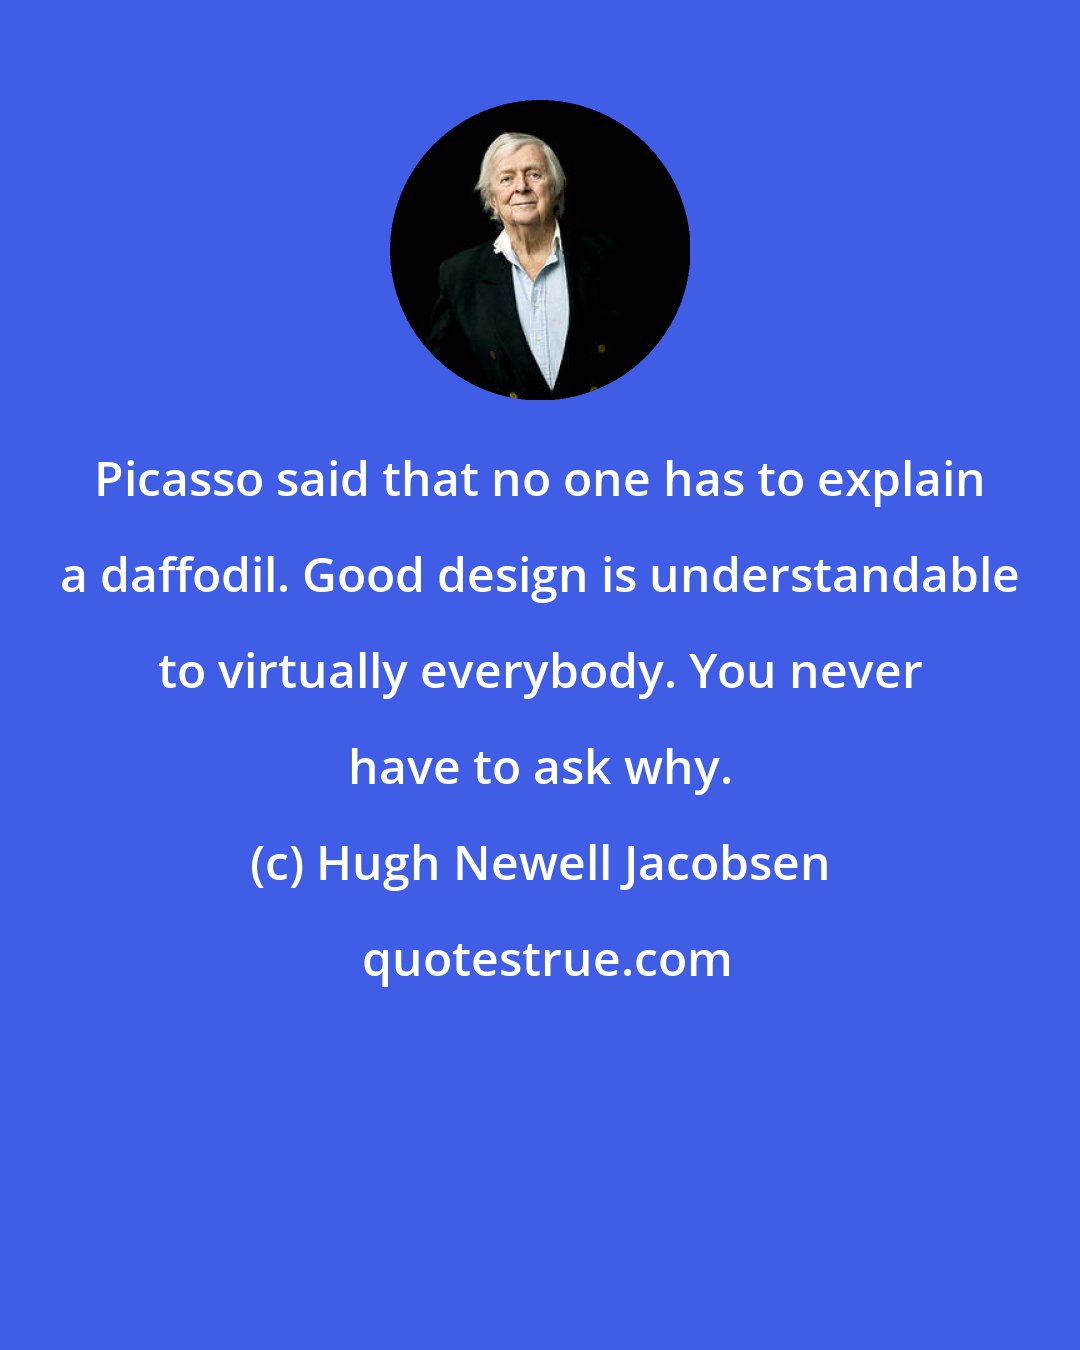 Hugh Newell Jacobsen: Picasso said that no one has to explain a daffodil. Good design is understandable to virtually everybody. You never have to ask why.